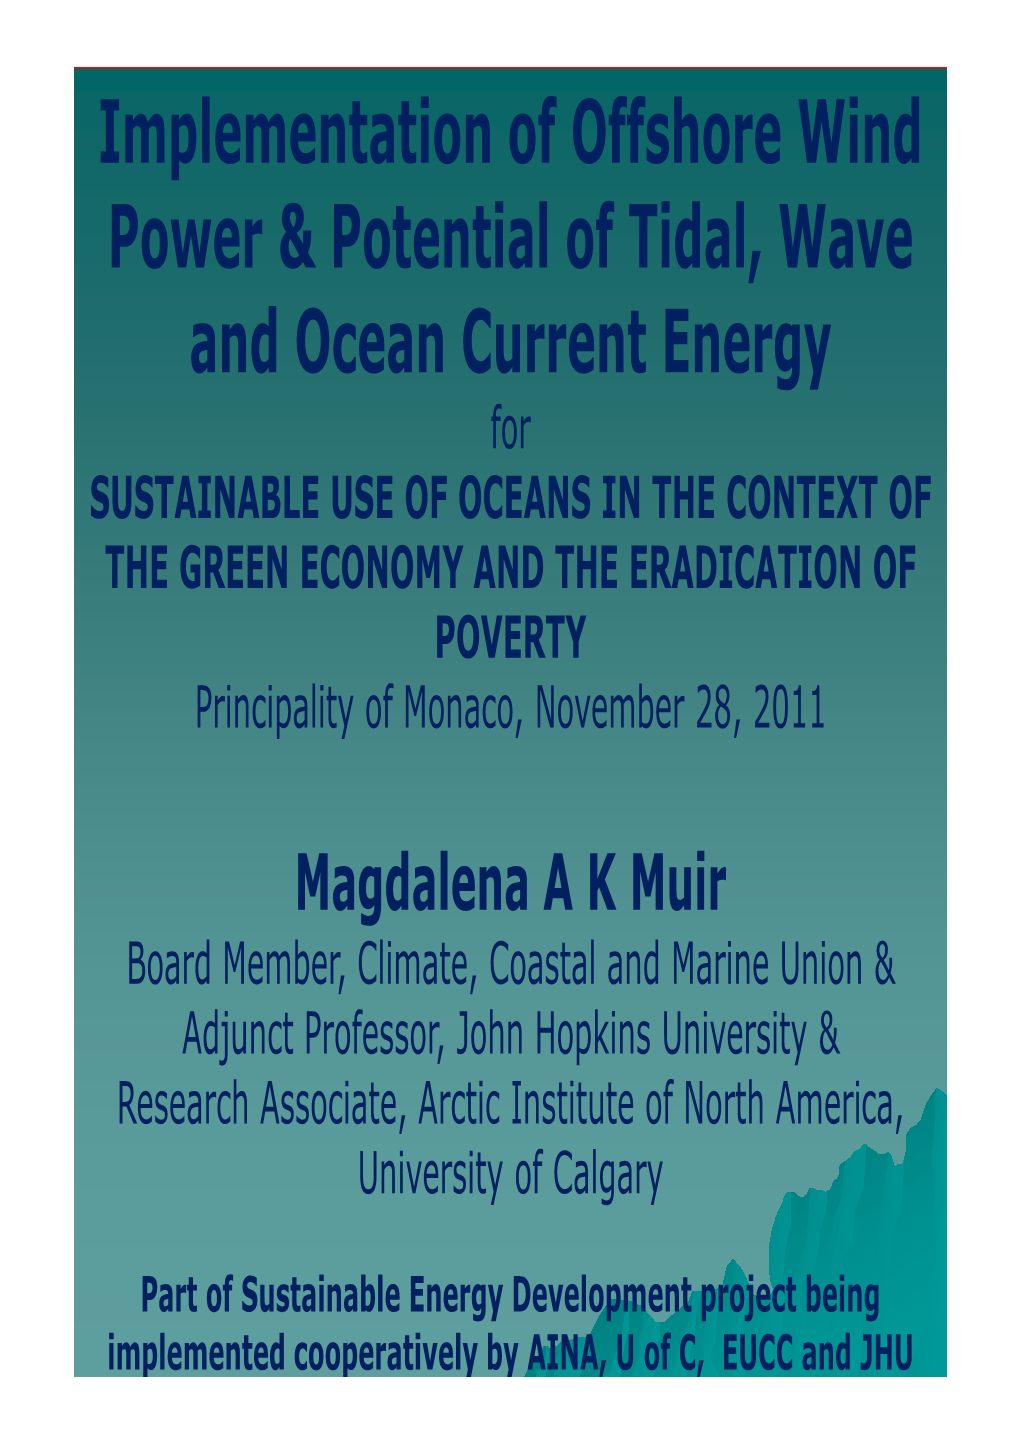 Implementation of Offshore Wind Power & Potential of Tidal, Wave